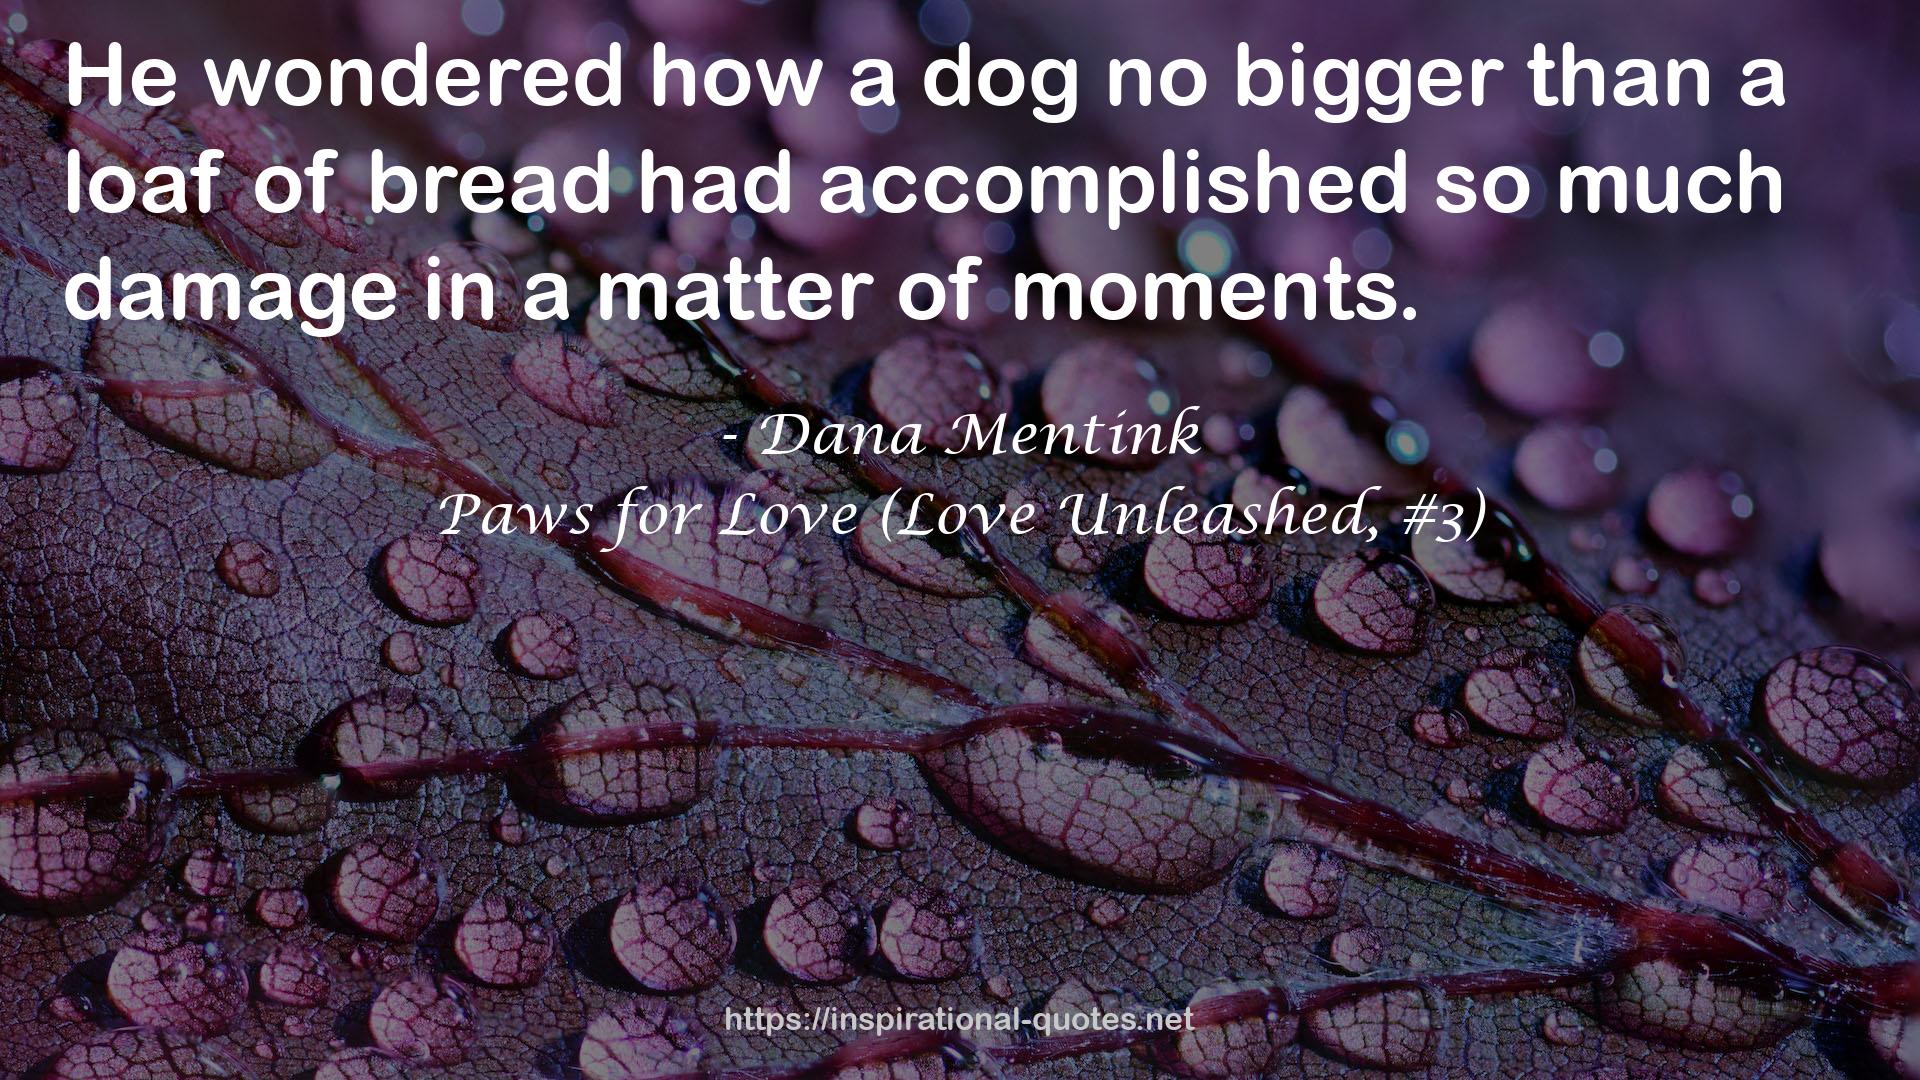 Paws for Love (Love Unleashed, #3) QUOTES